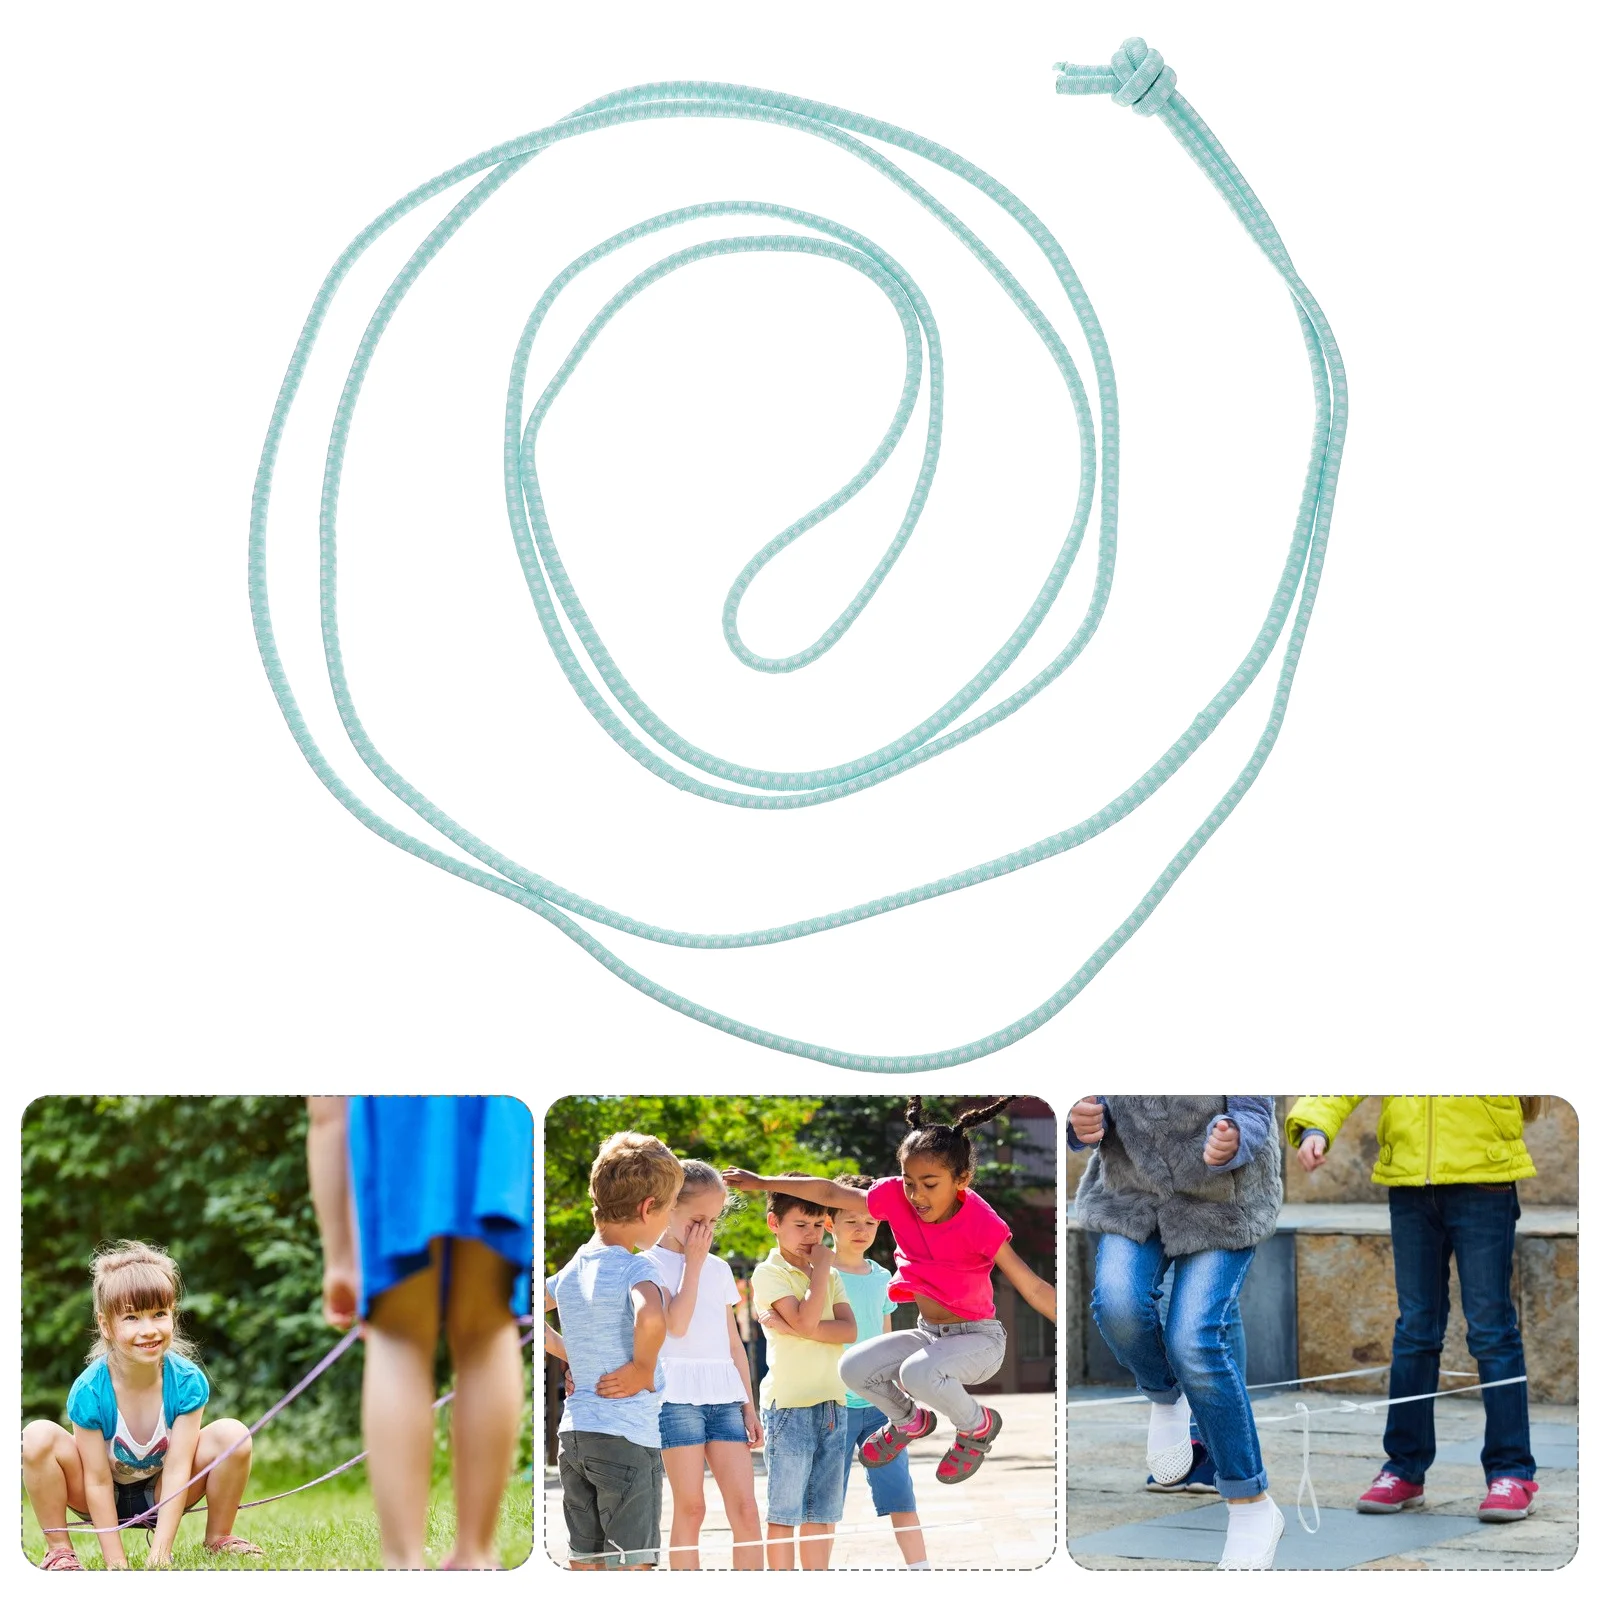 

Jump Rope Adjustable Fitness Skipping Rope for Kids Keeping Fit Children and Students Outdoor Fun Activity Party Favor (